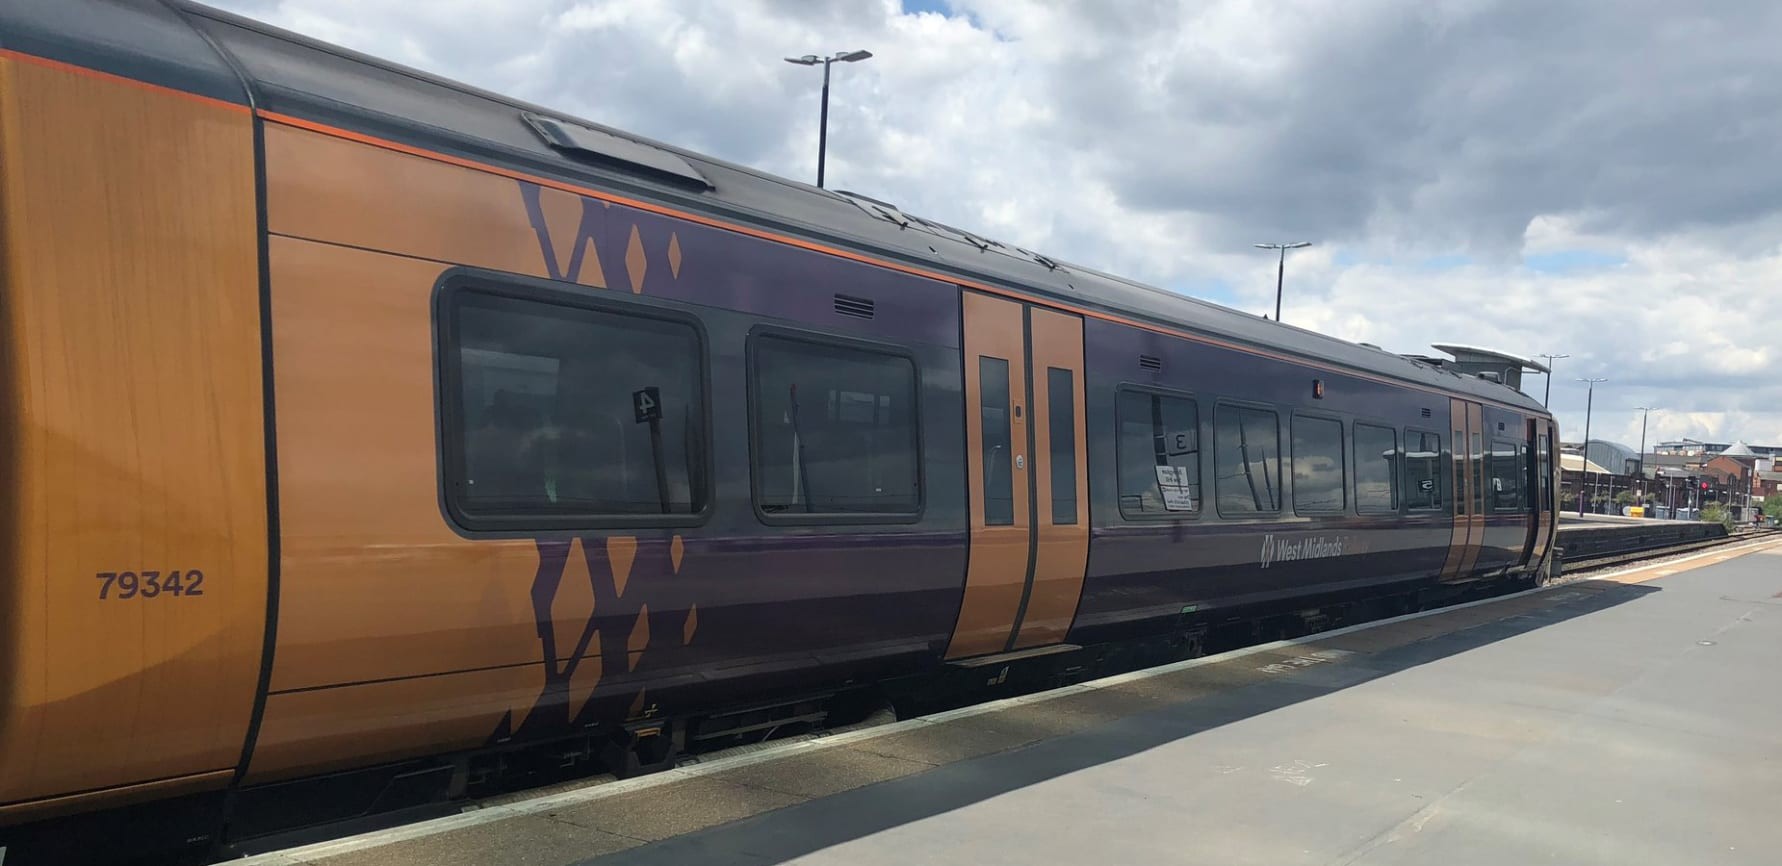 ​ Rail passengers in the West Midlands to benefit from timetable improvements this May